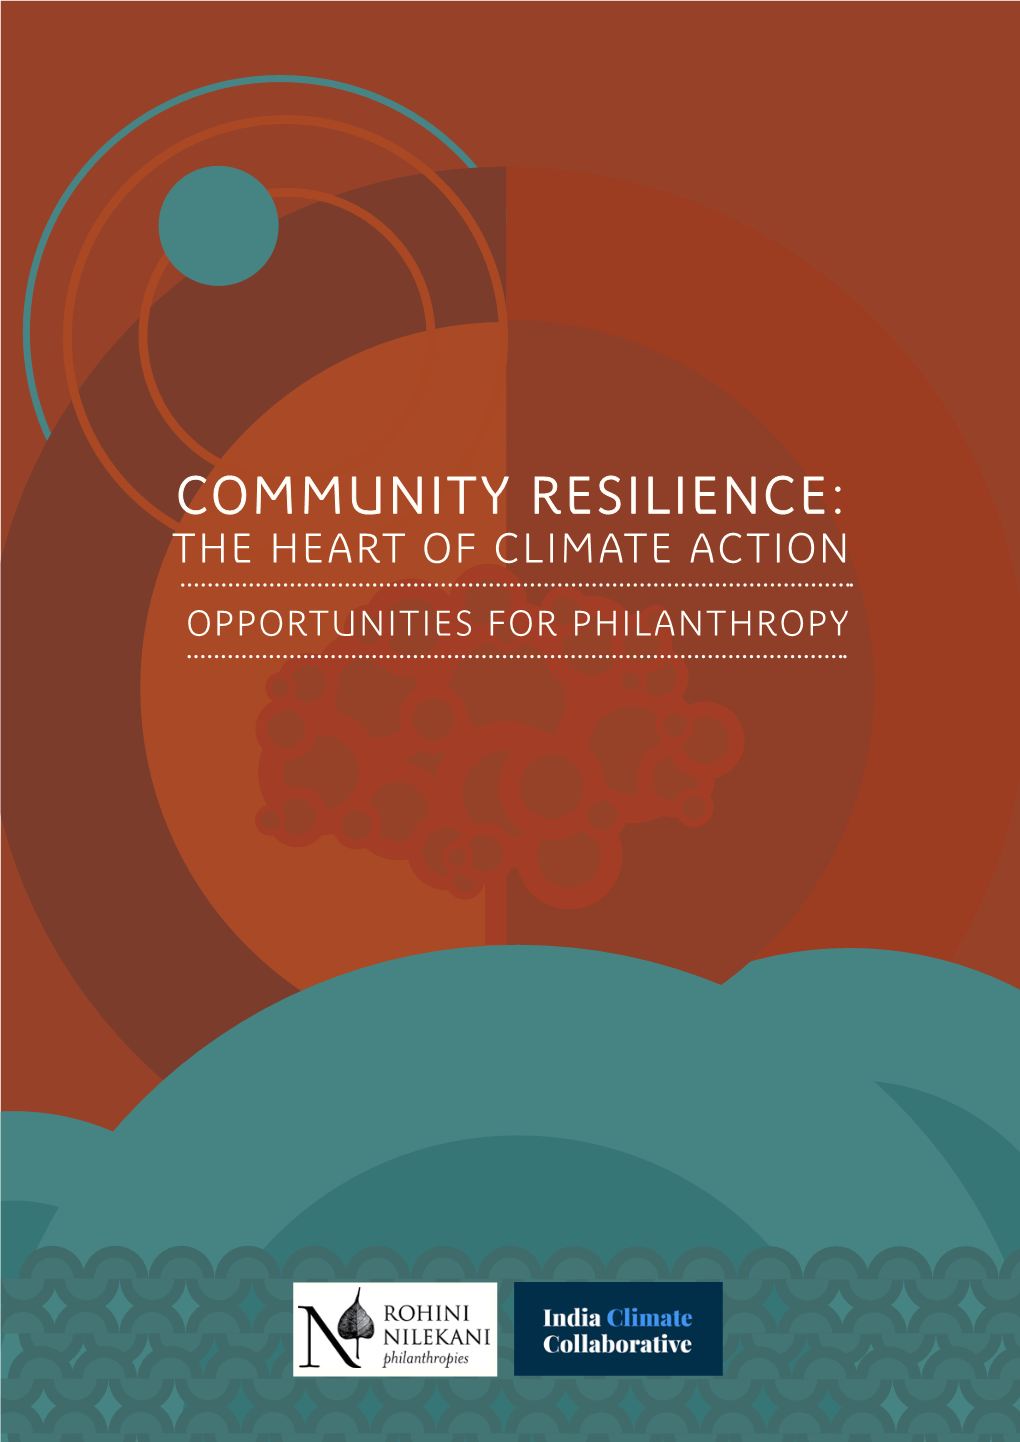 Community Resilience: the Heart of Climate Action